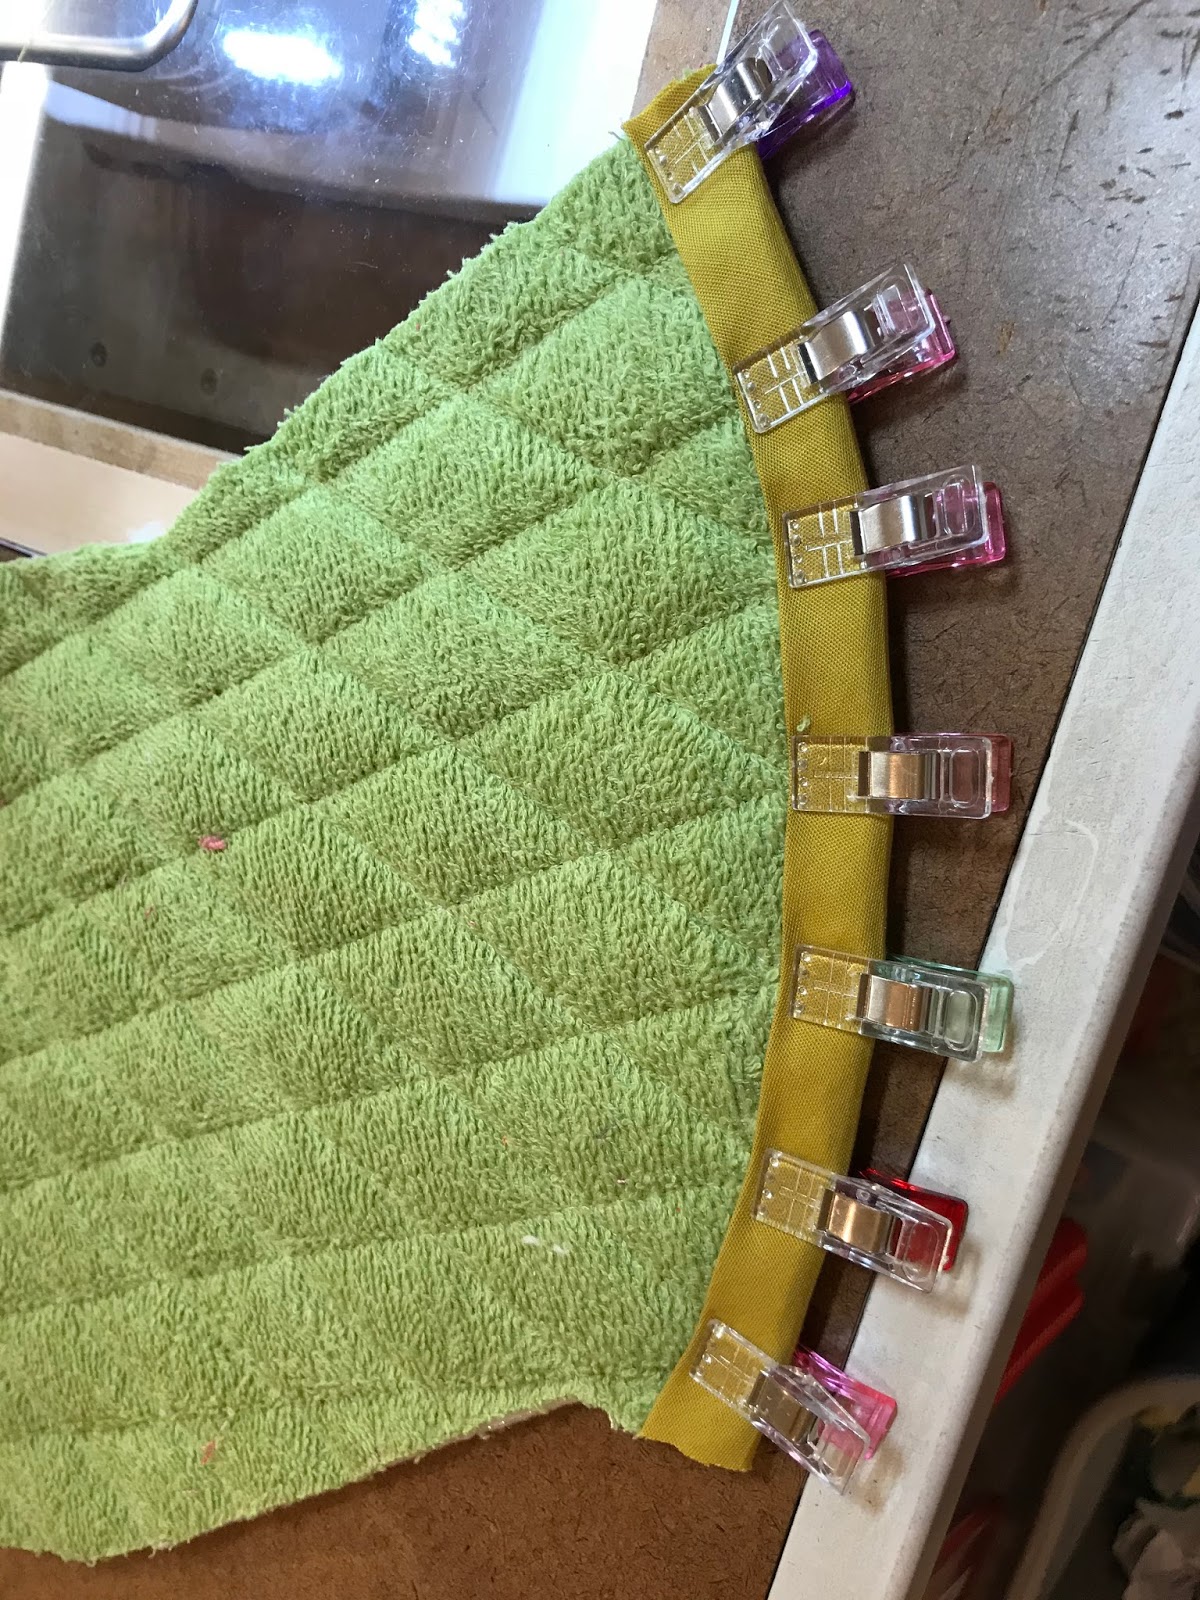 Rebecca Grace Quilting: In Which My Husband Sets My Oven Mitts On